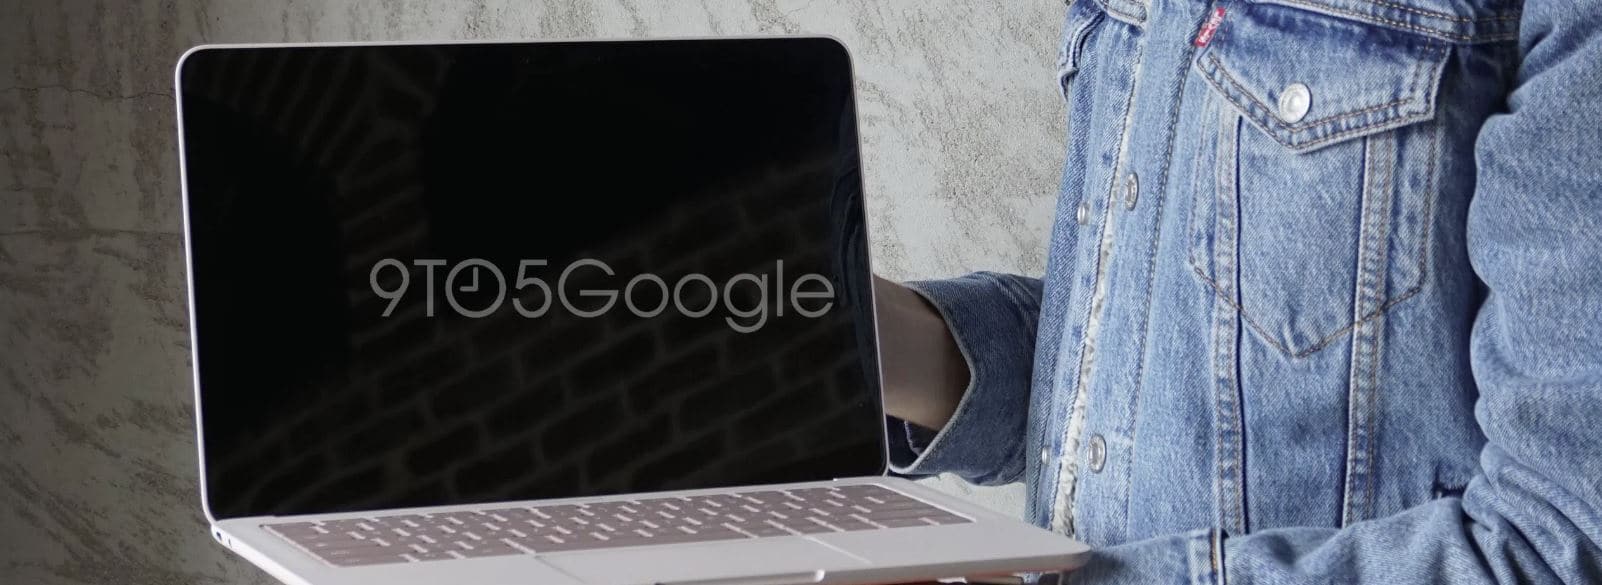 made by google 2019